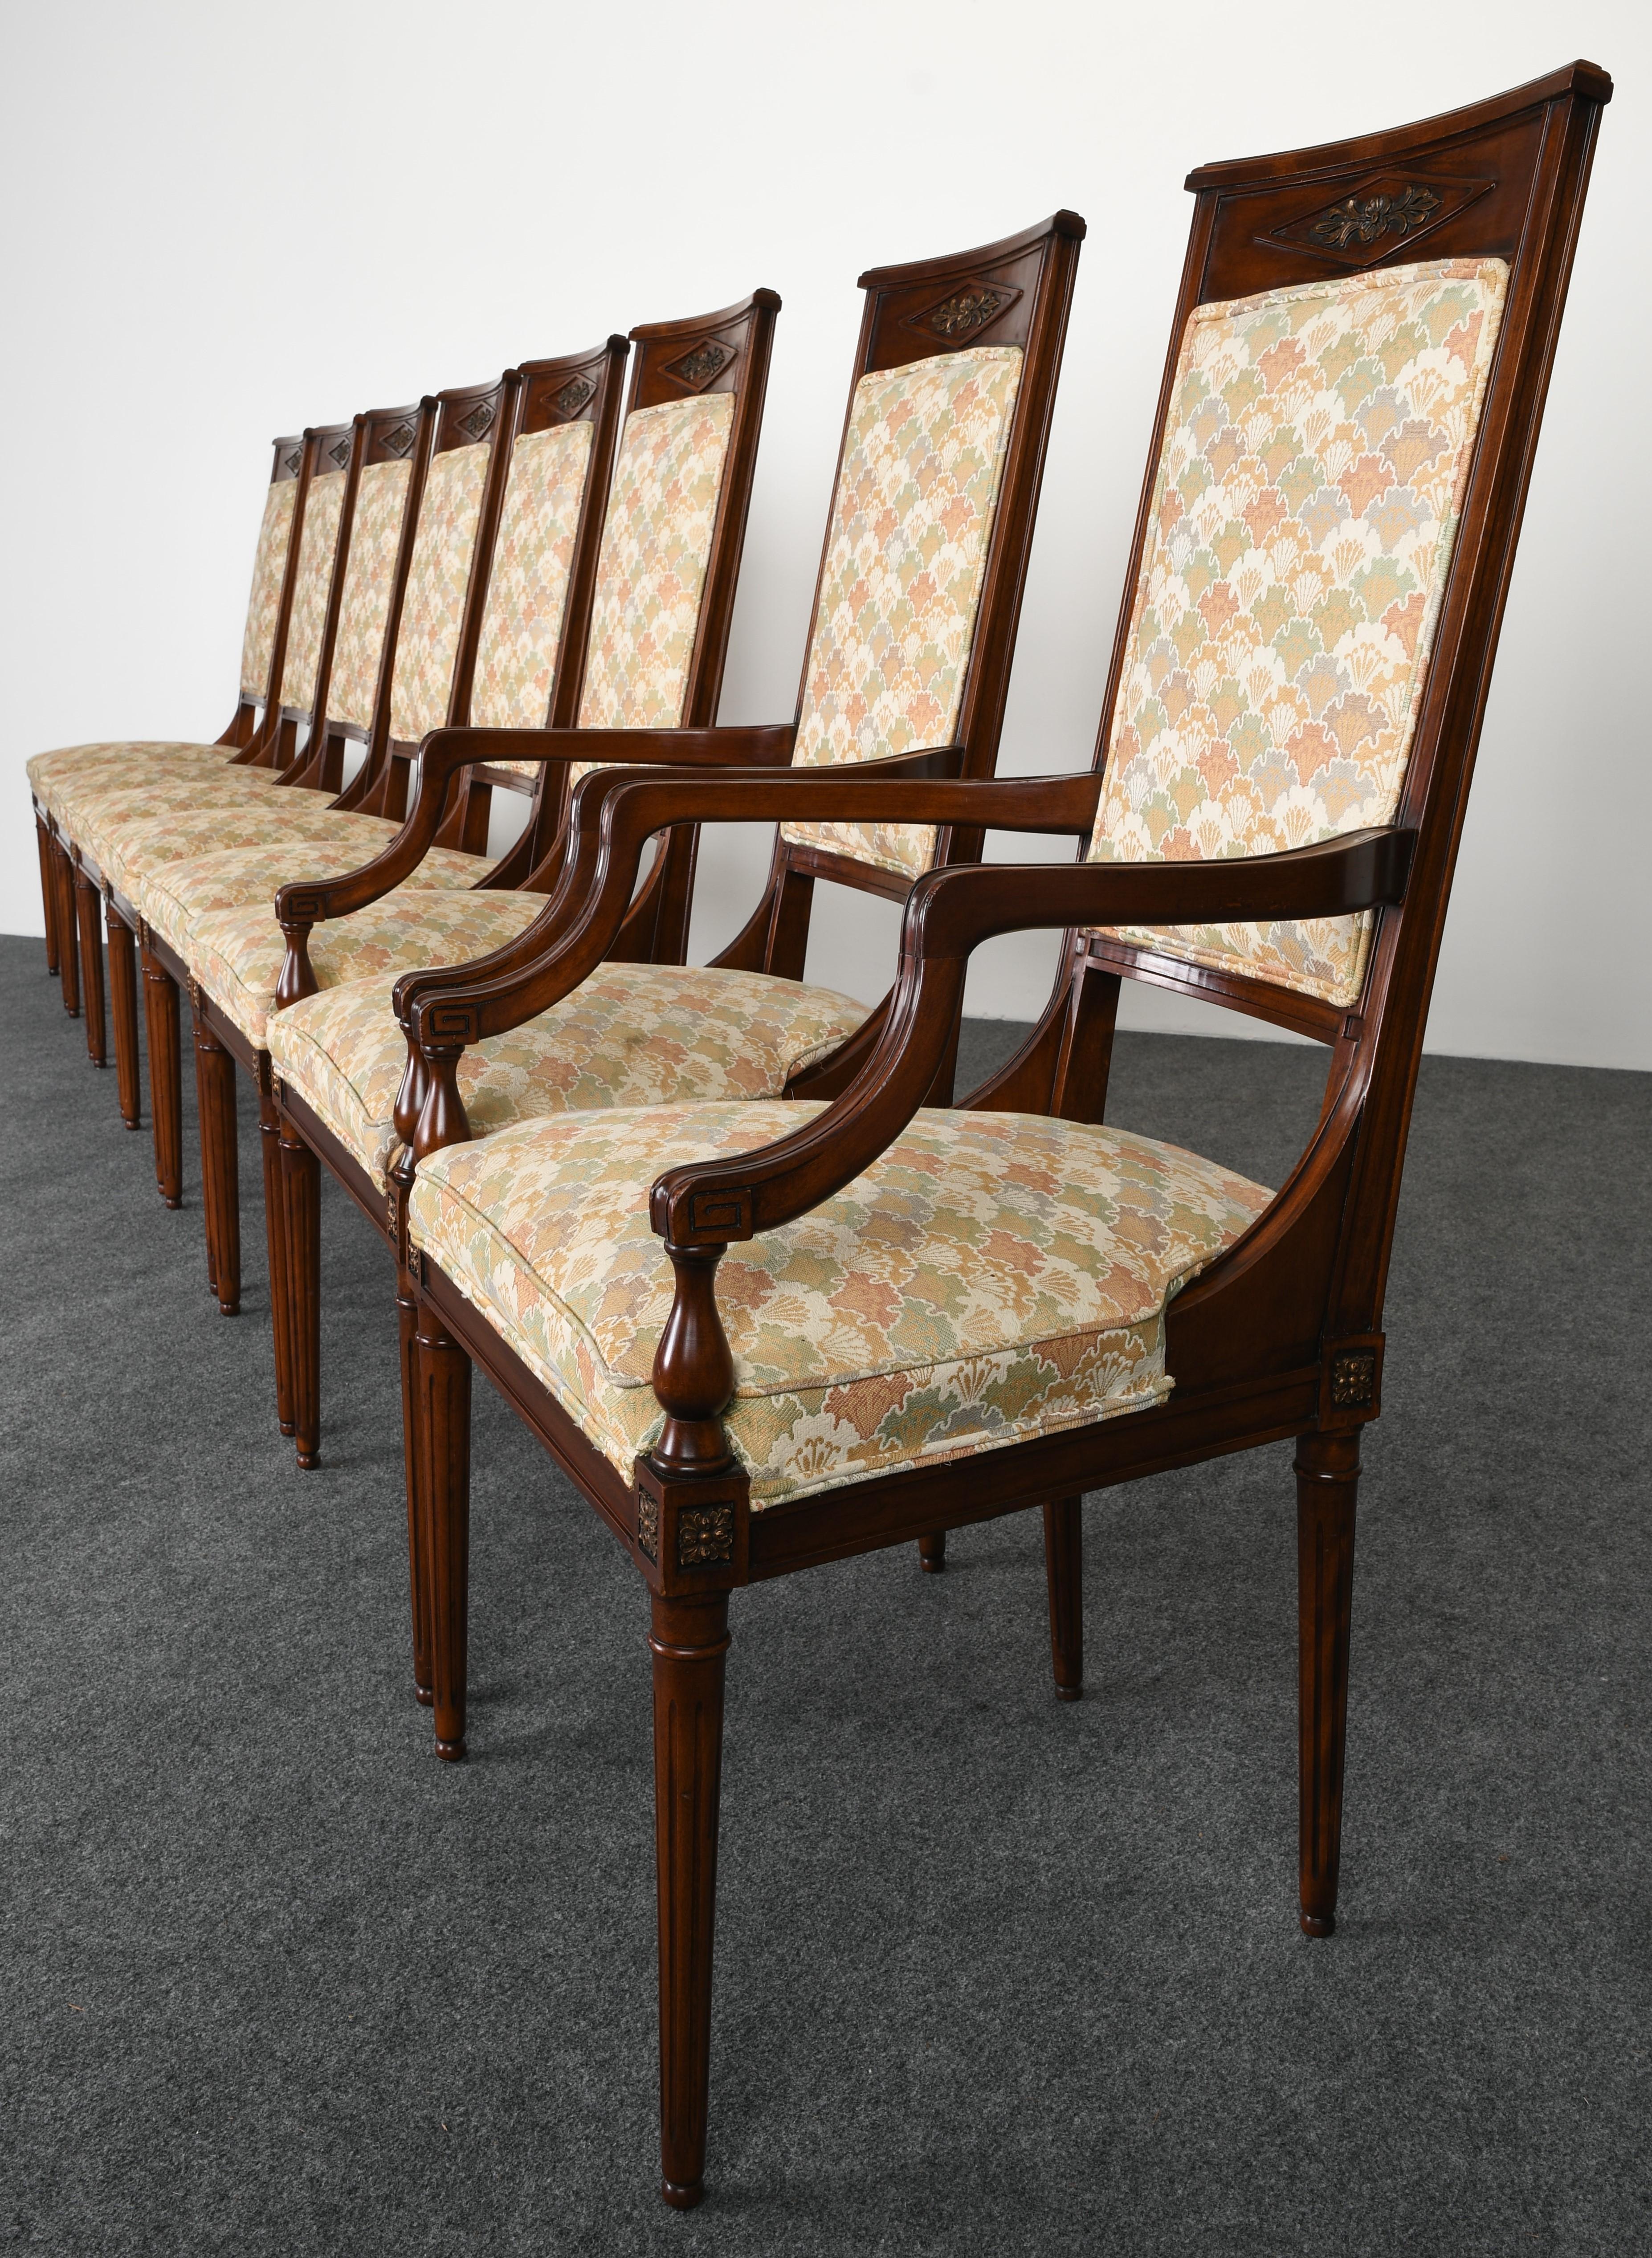 An elegant neoclassical style set of eight mahogany dining chairs in the style of Karges Furniture Company. Very good vintage condition with age appropriate wear. One ball foot has chip not noticeable, as shown in images. Hand carved crest flower